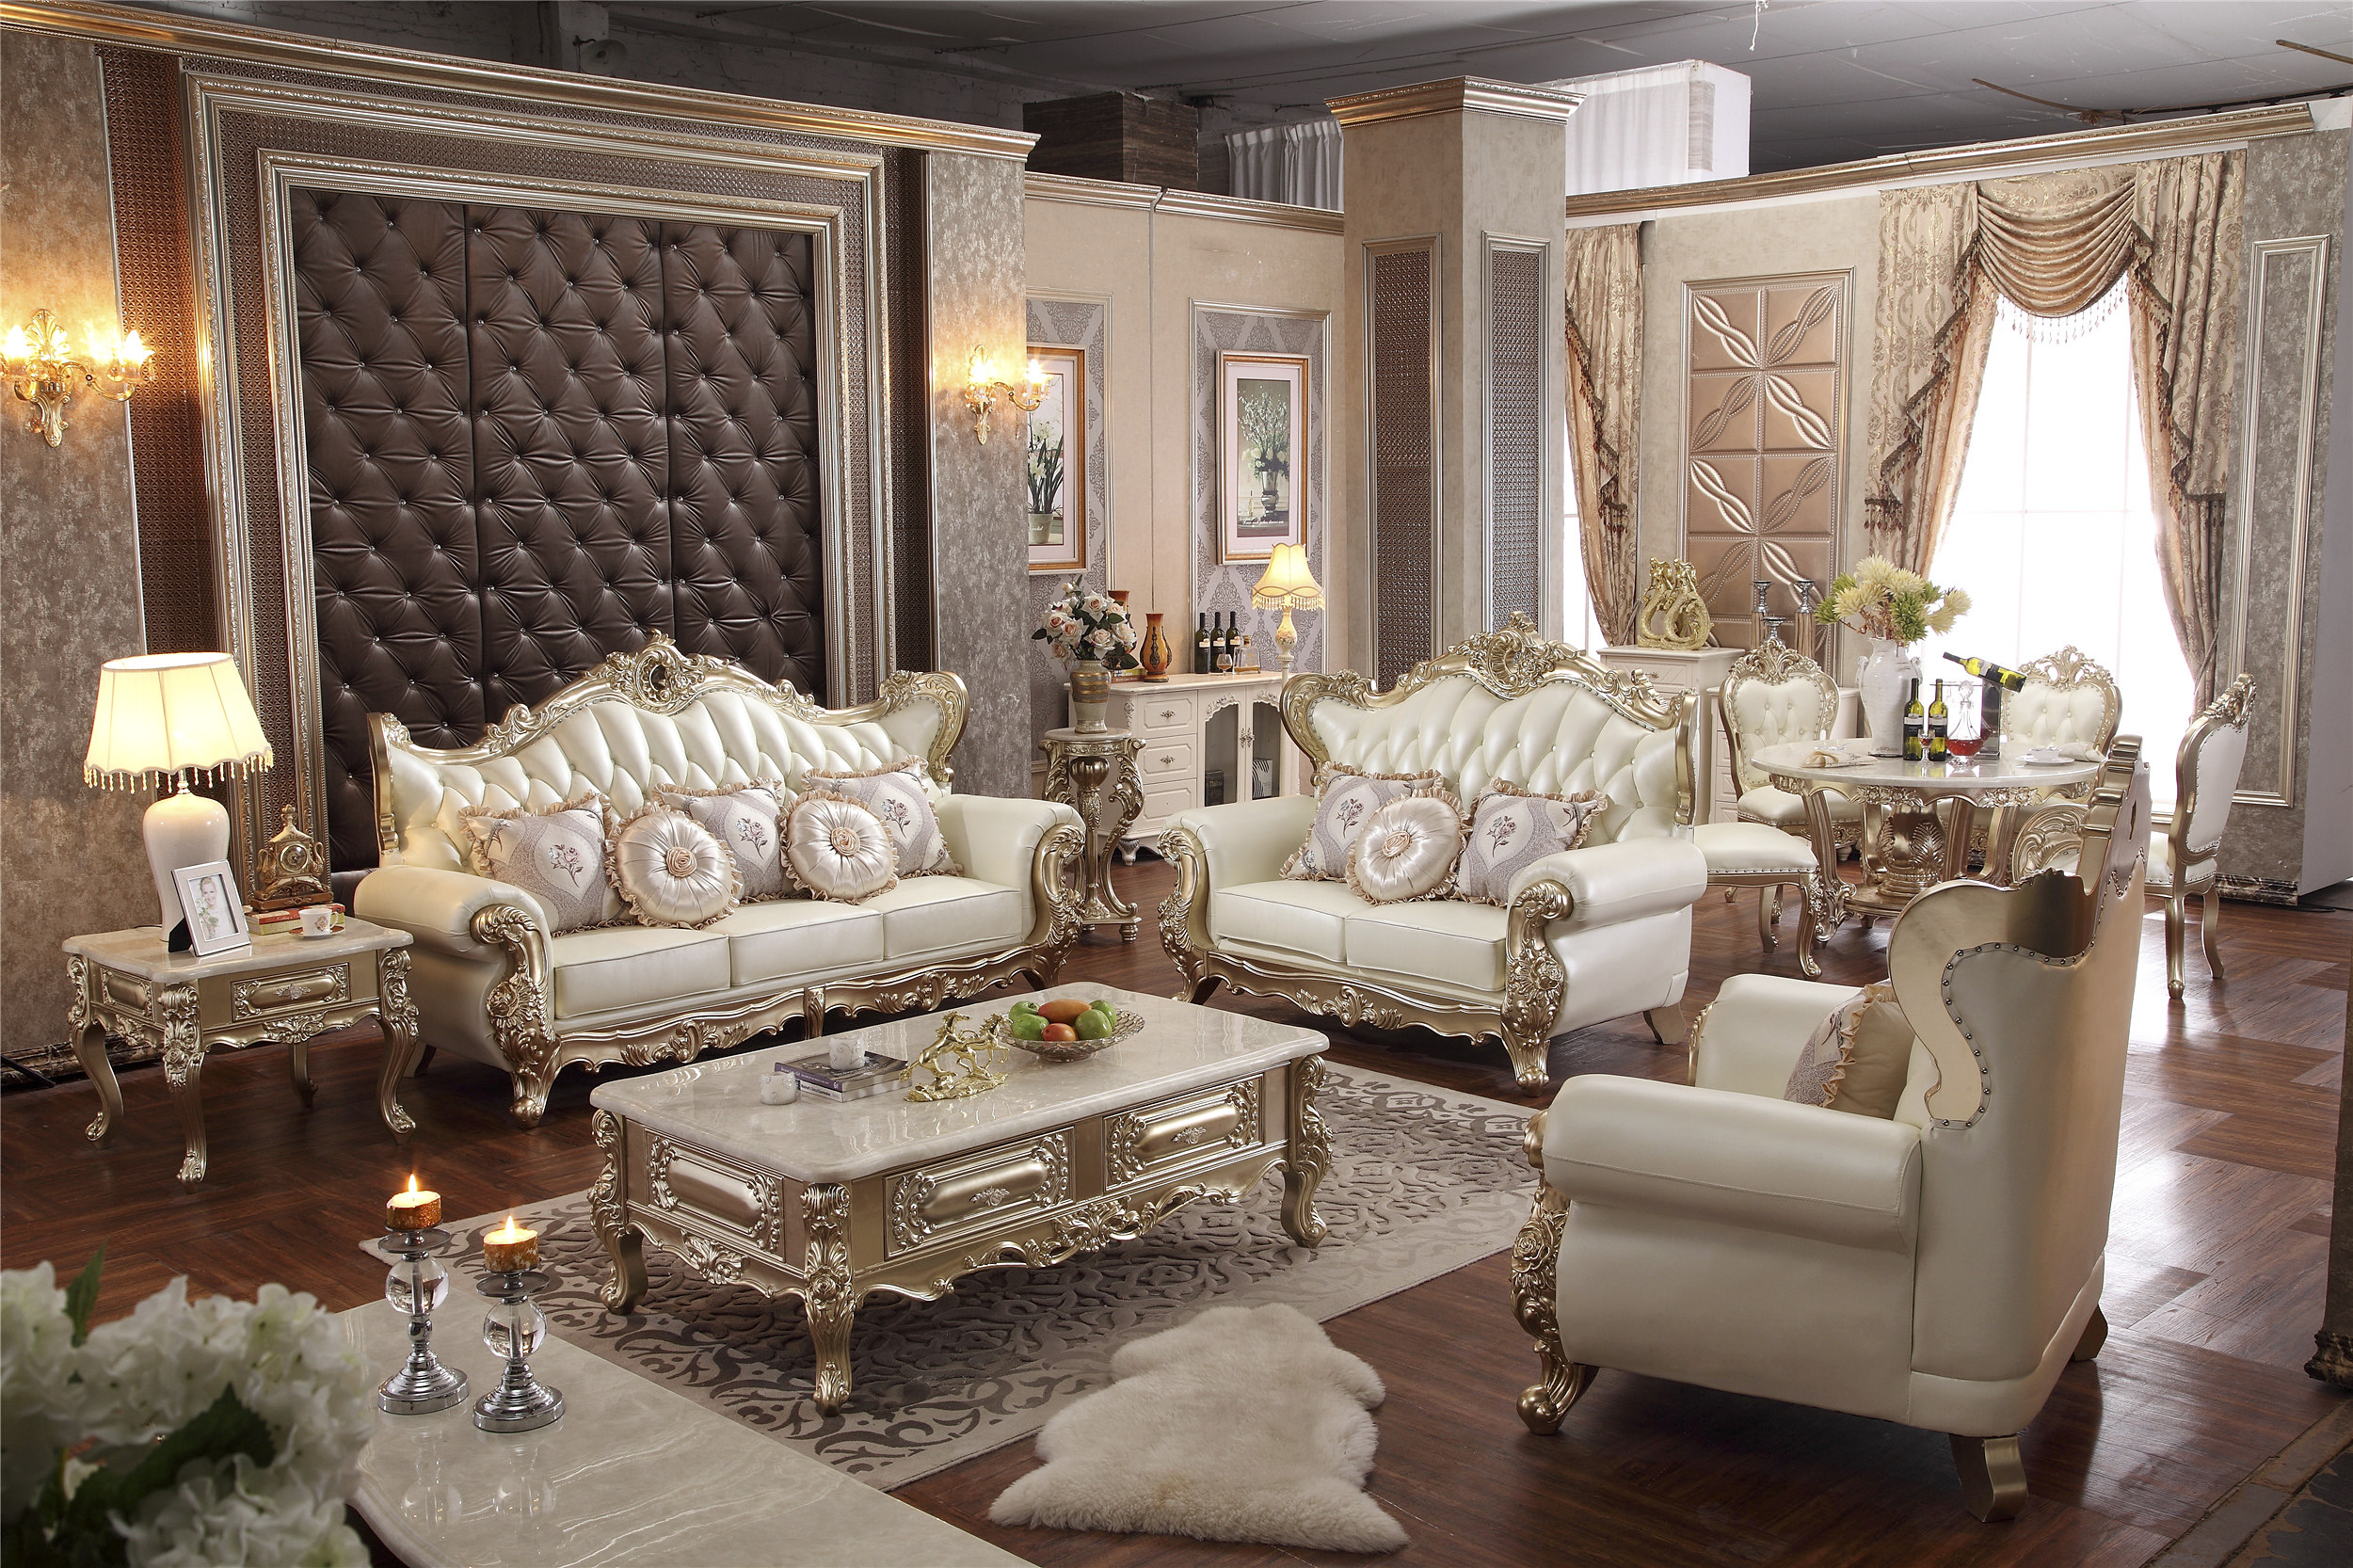 Baroque living room furniture sofa set solid wood and leather sofa set luxury furniture wholesale price